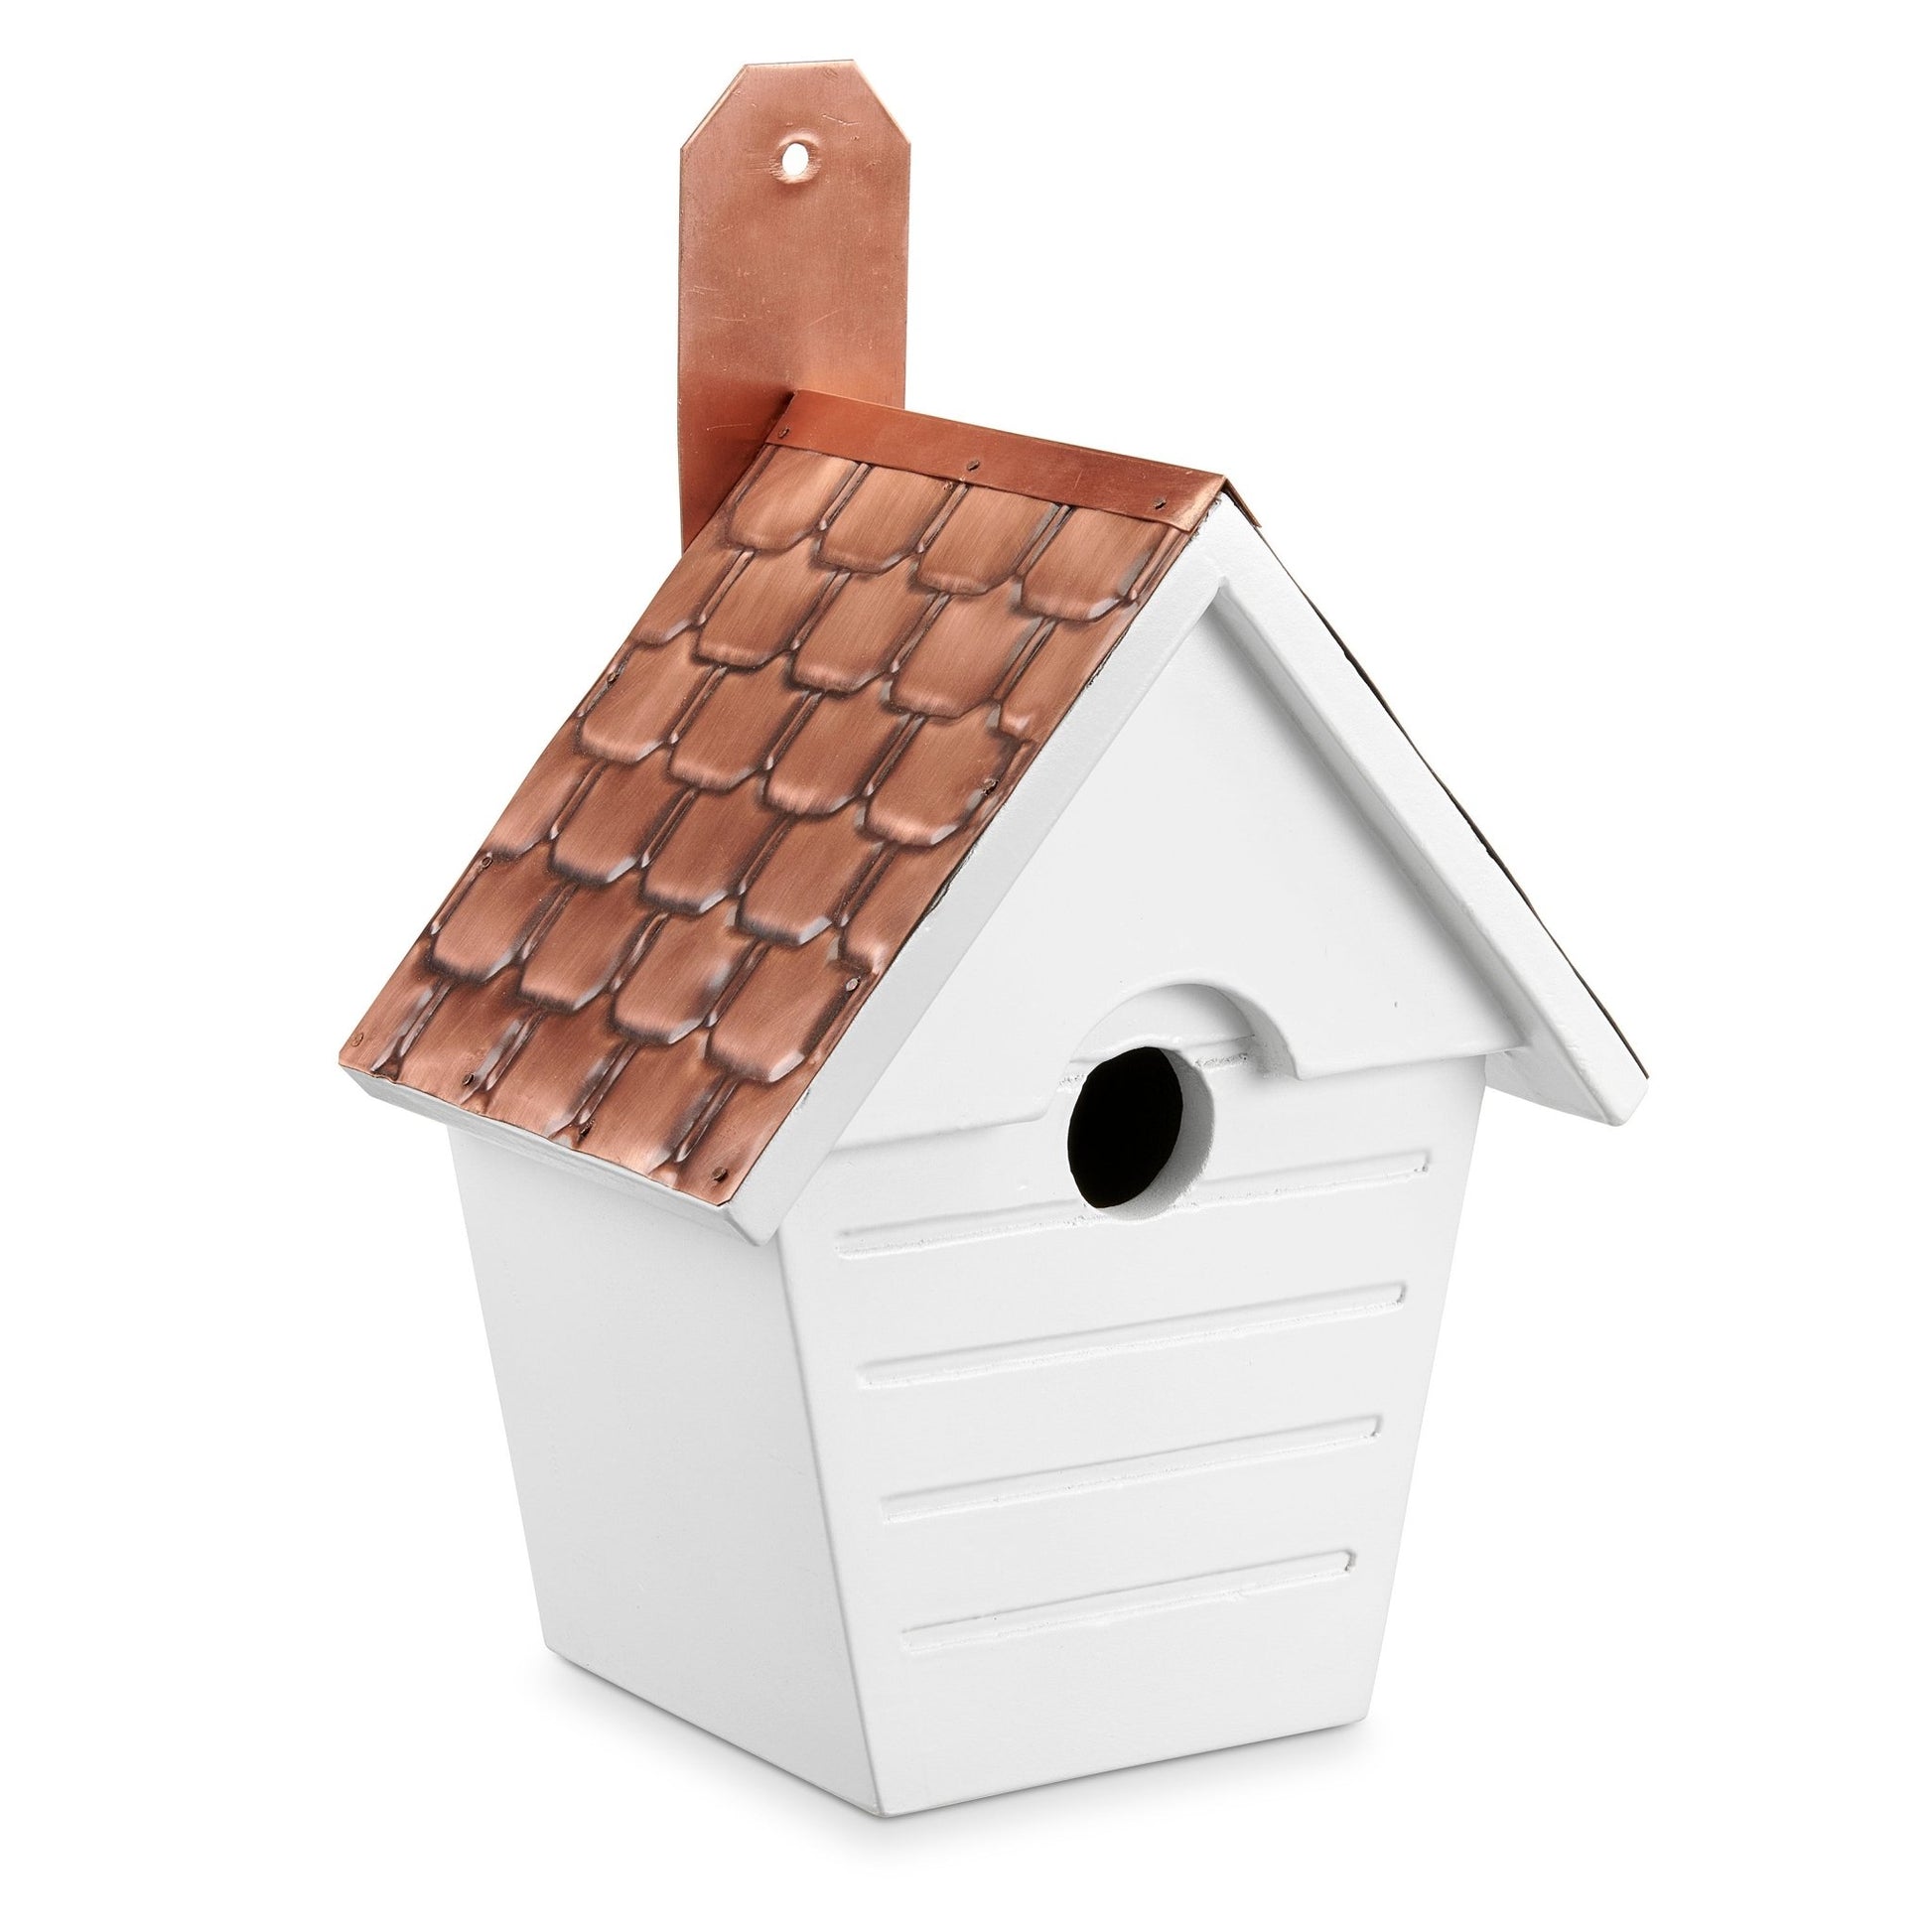 Classic Cottage Bird House – Shingled Antique Copper Roof - Good Directions